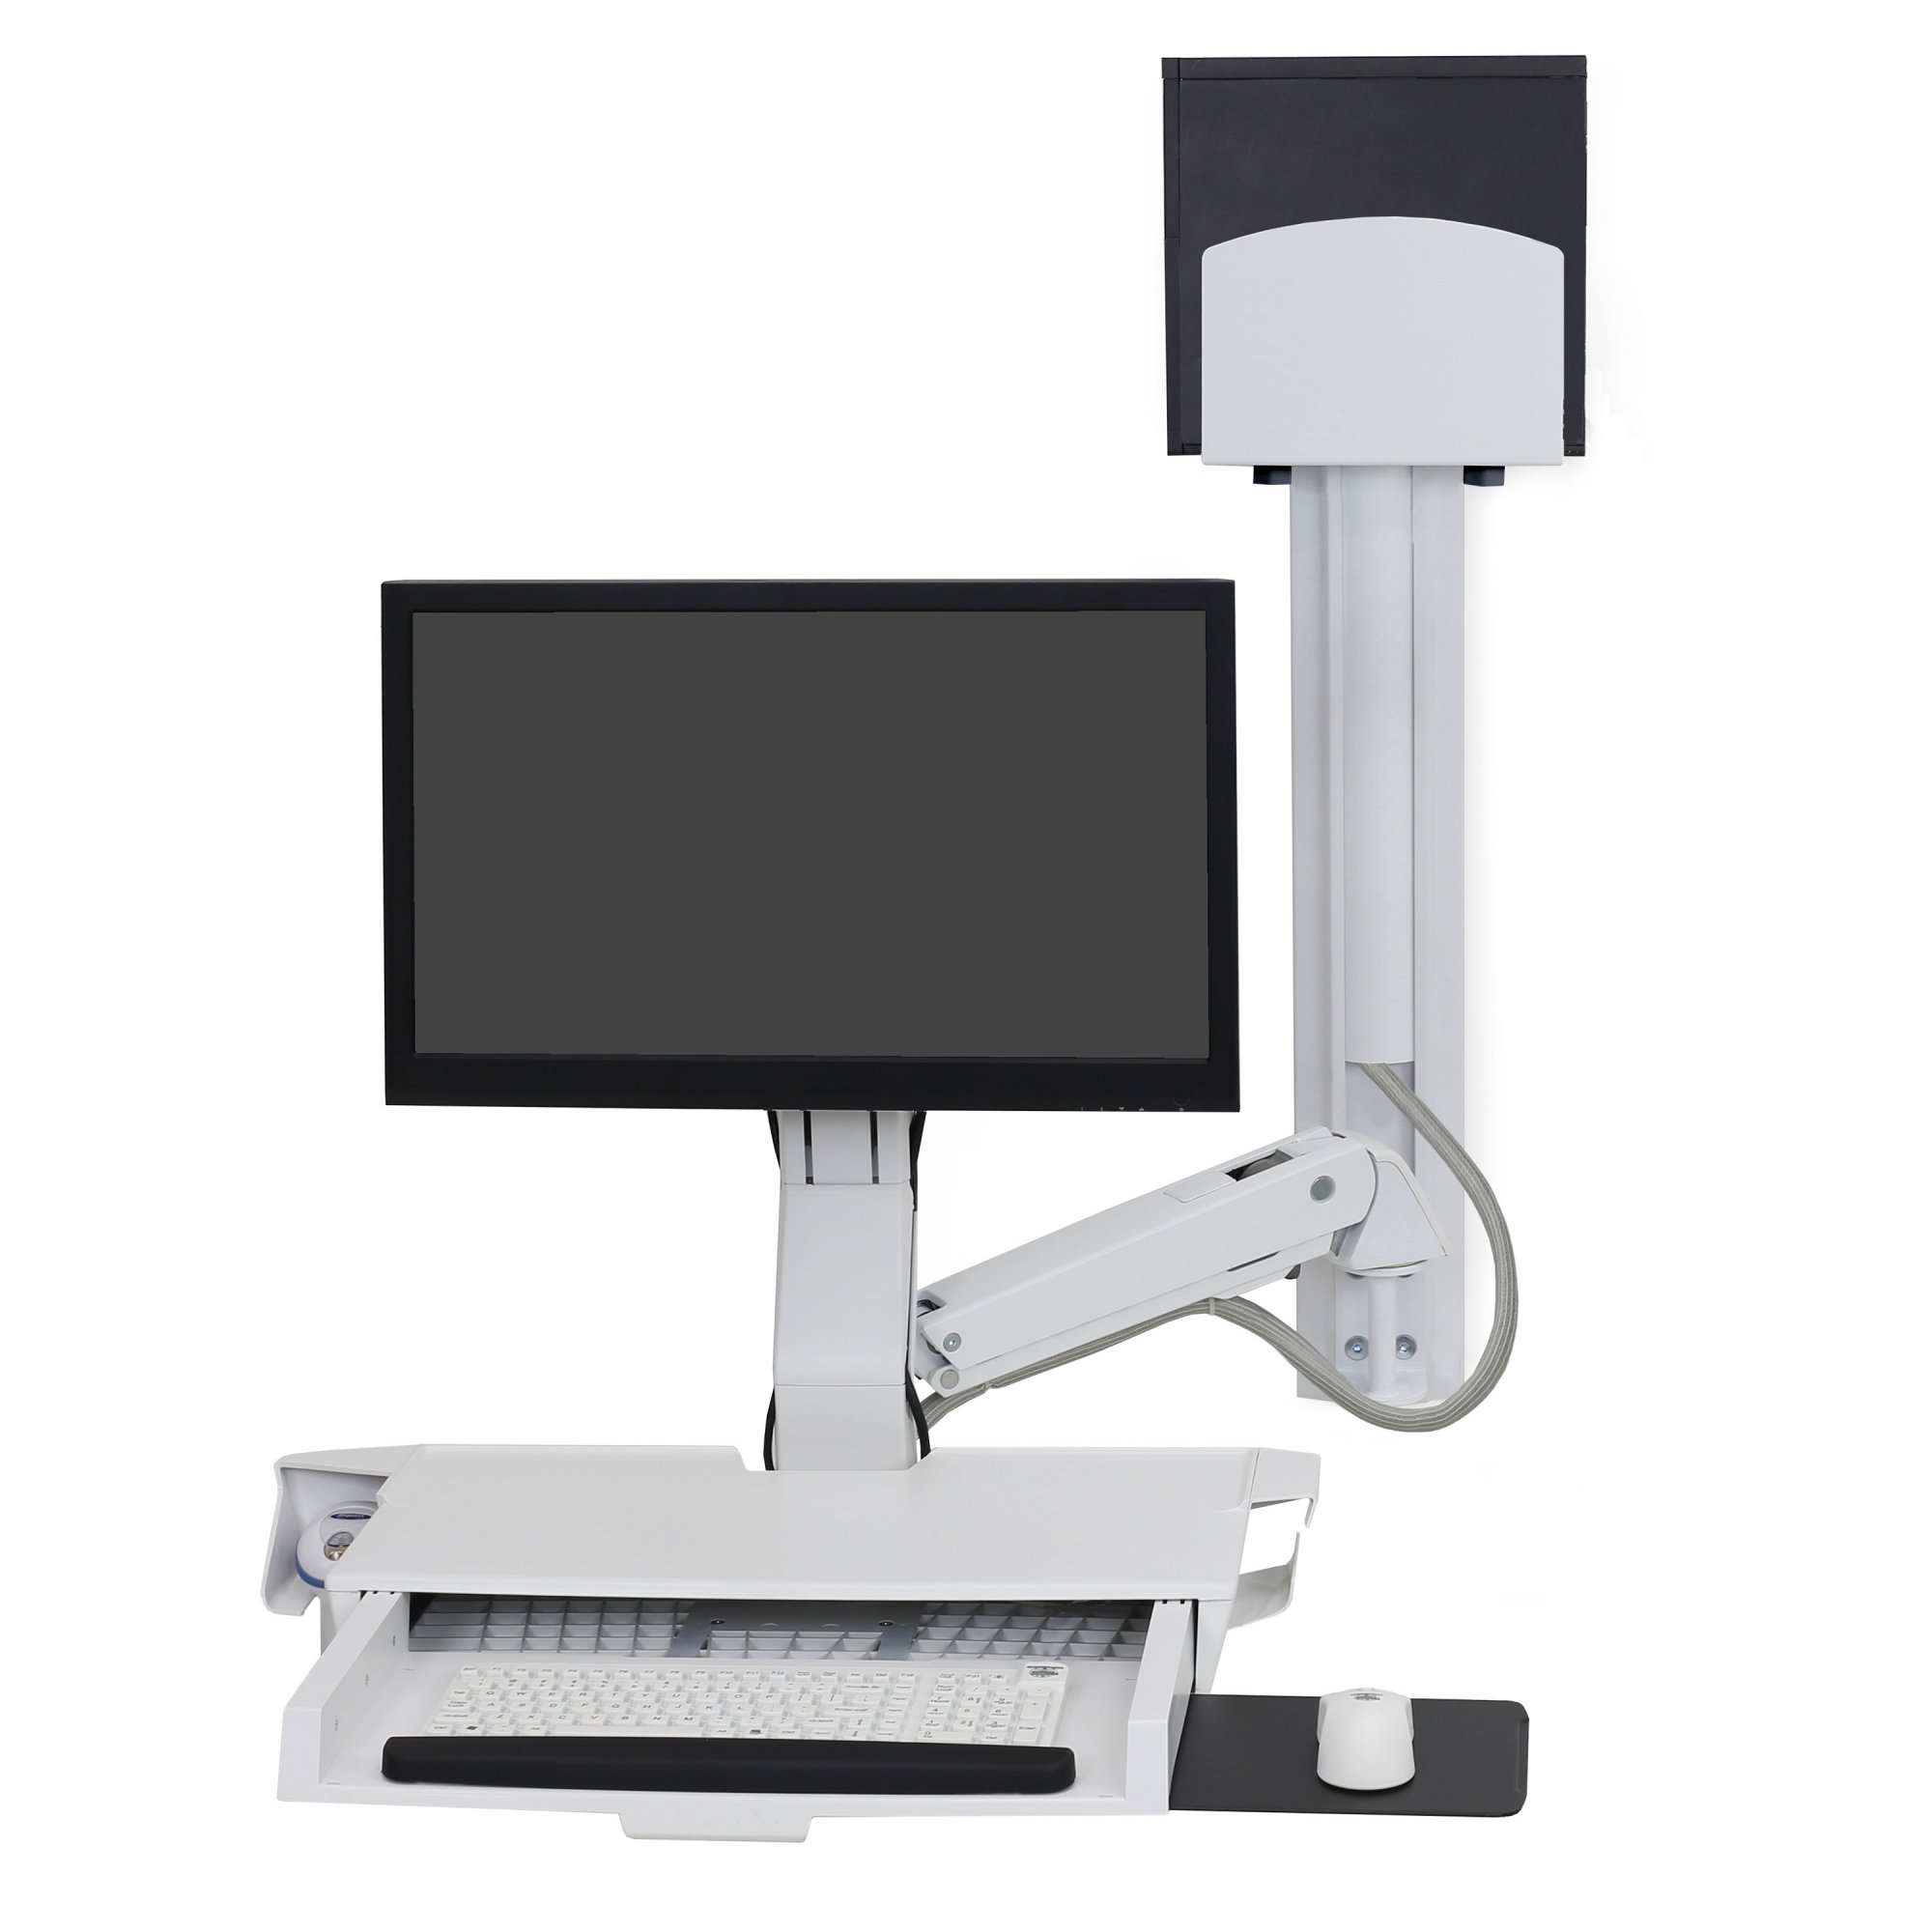 Ergotron 45-270-216 Sit-Stand Combo System, Worksurface (white)